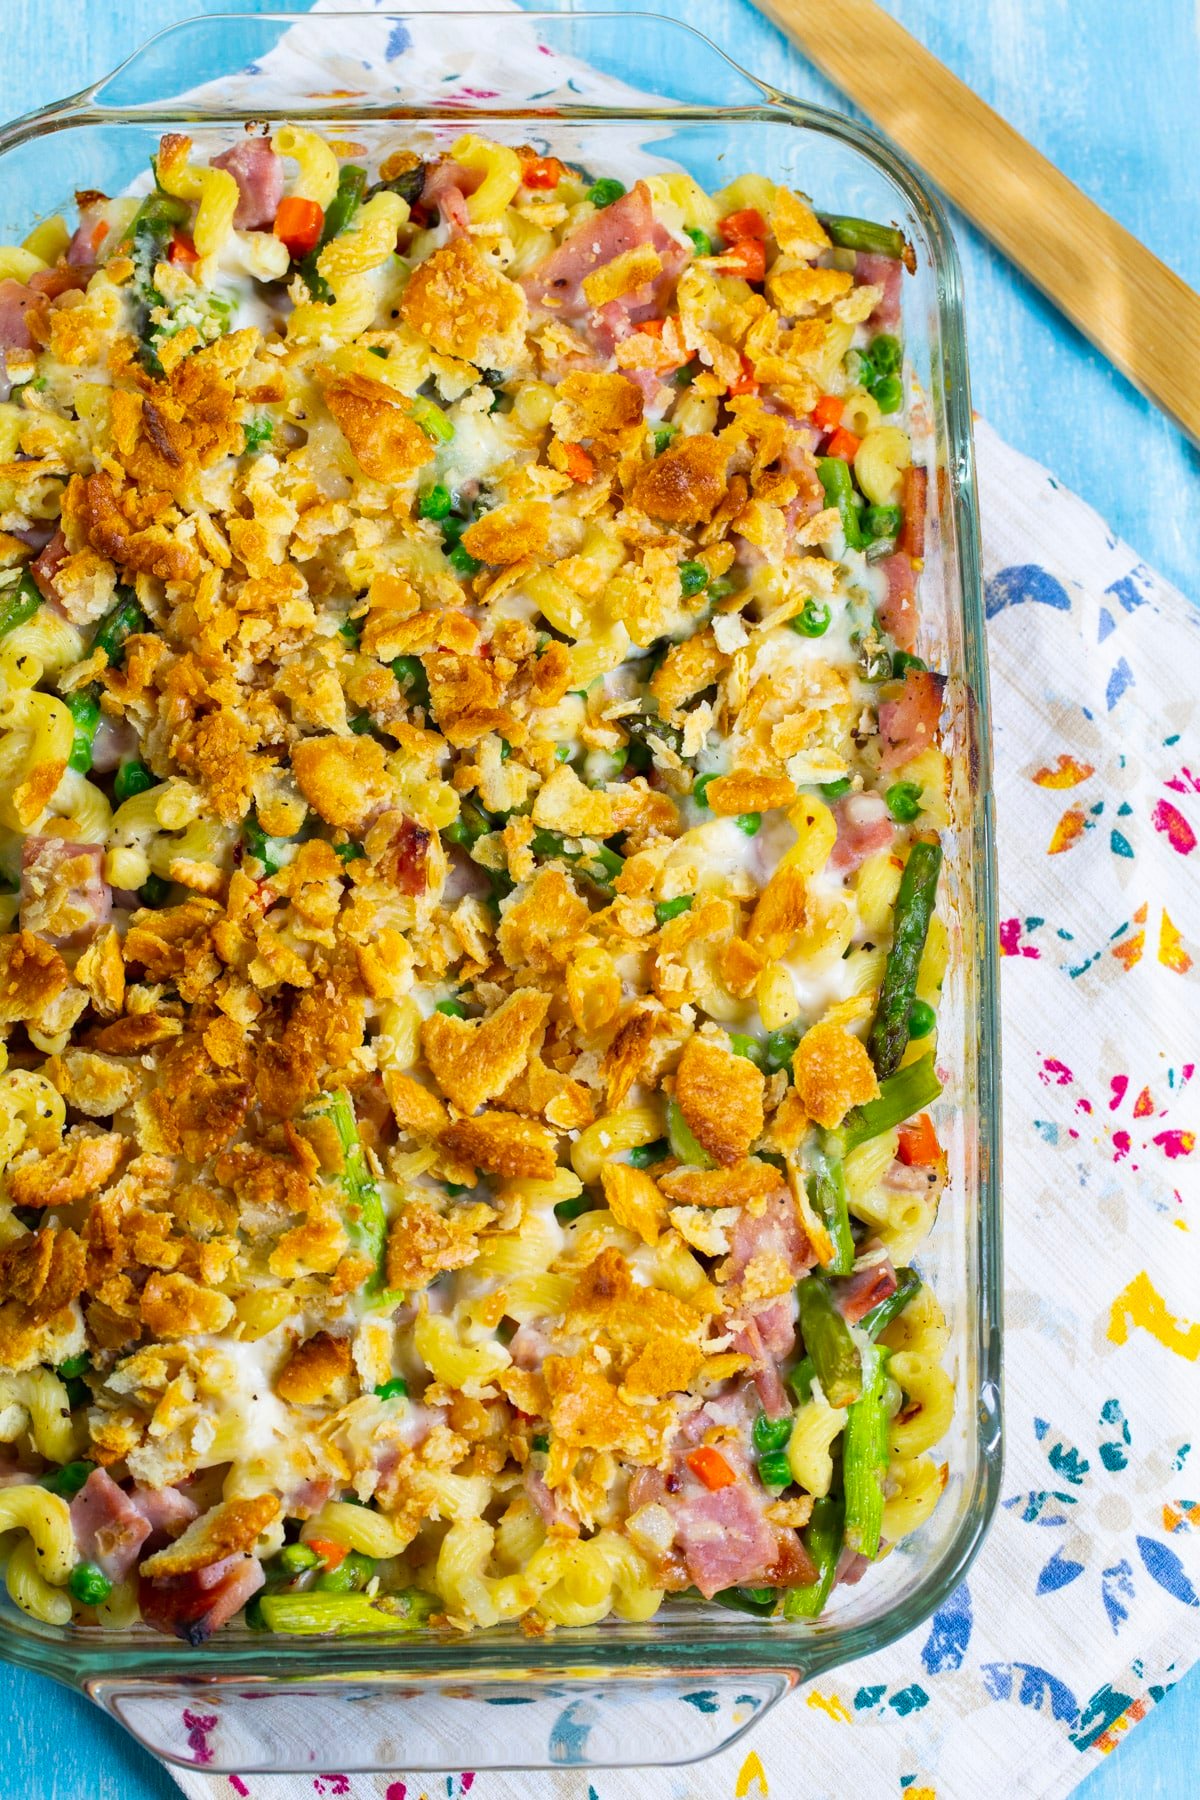 Baked casserole in 9x13-inch baking dish.